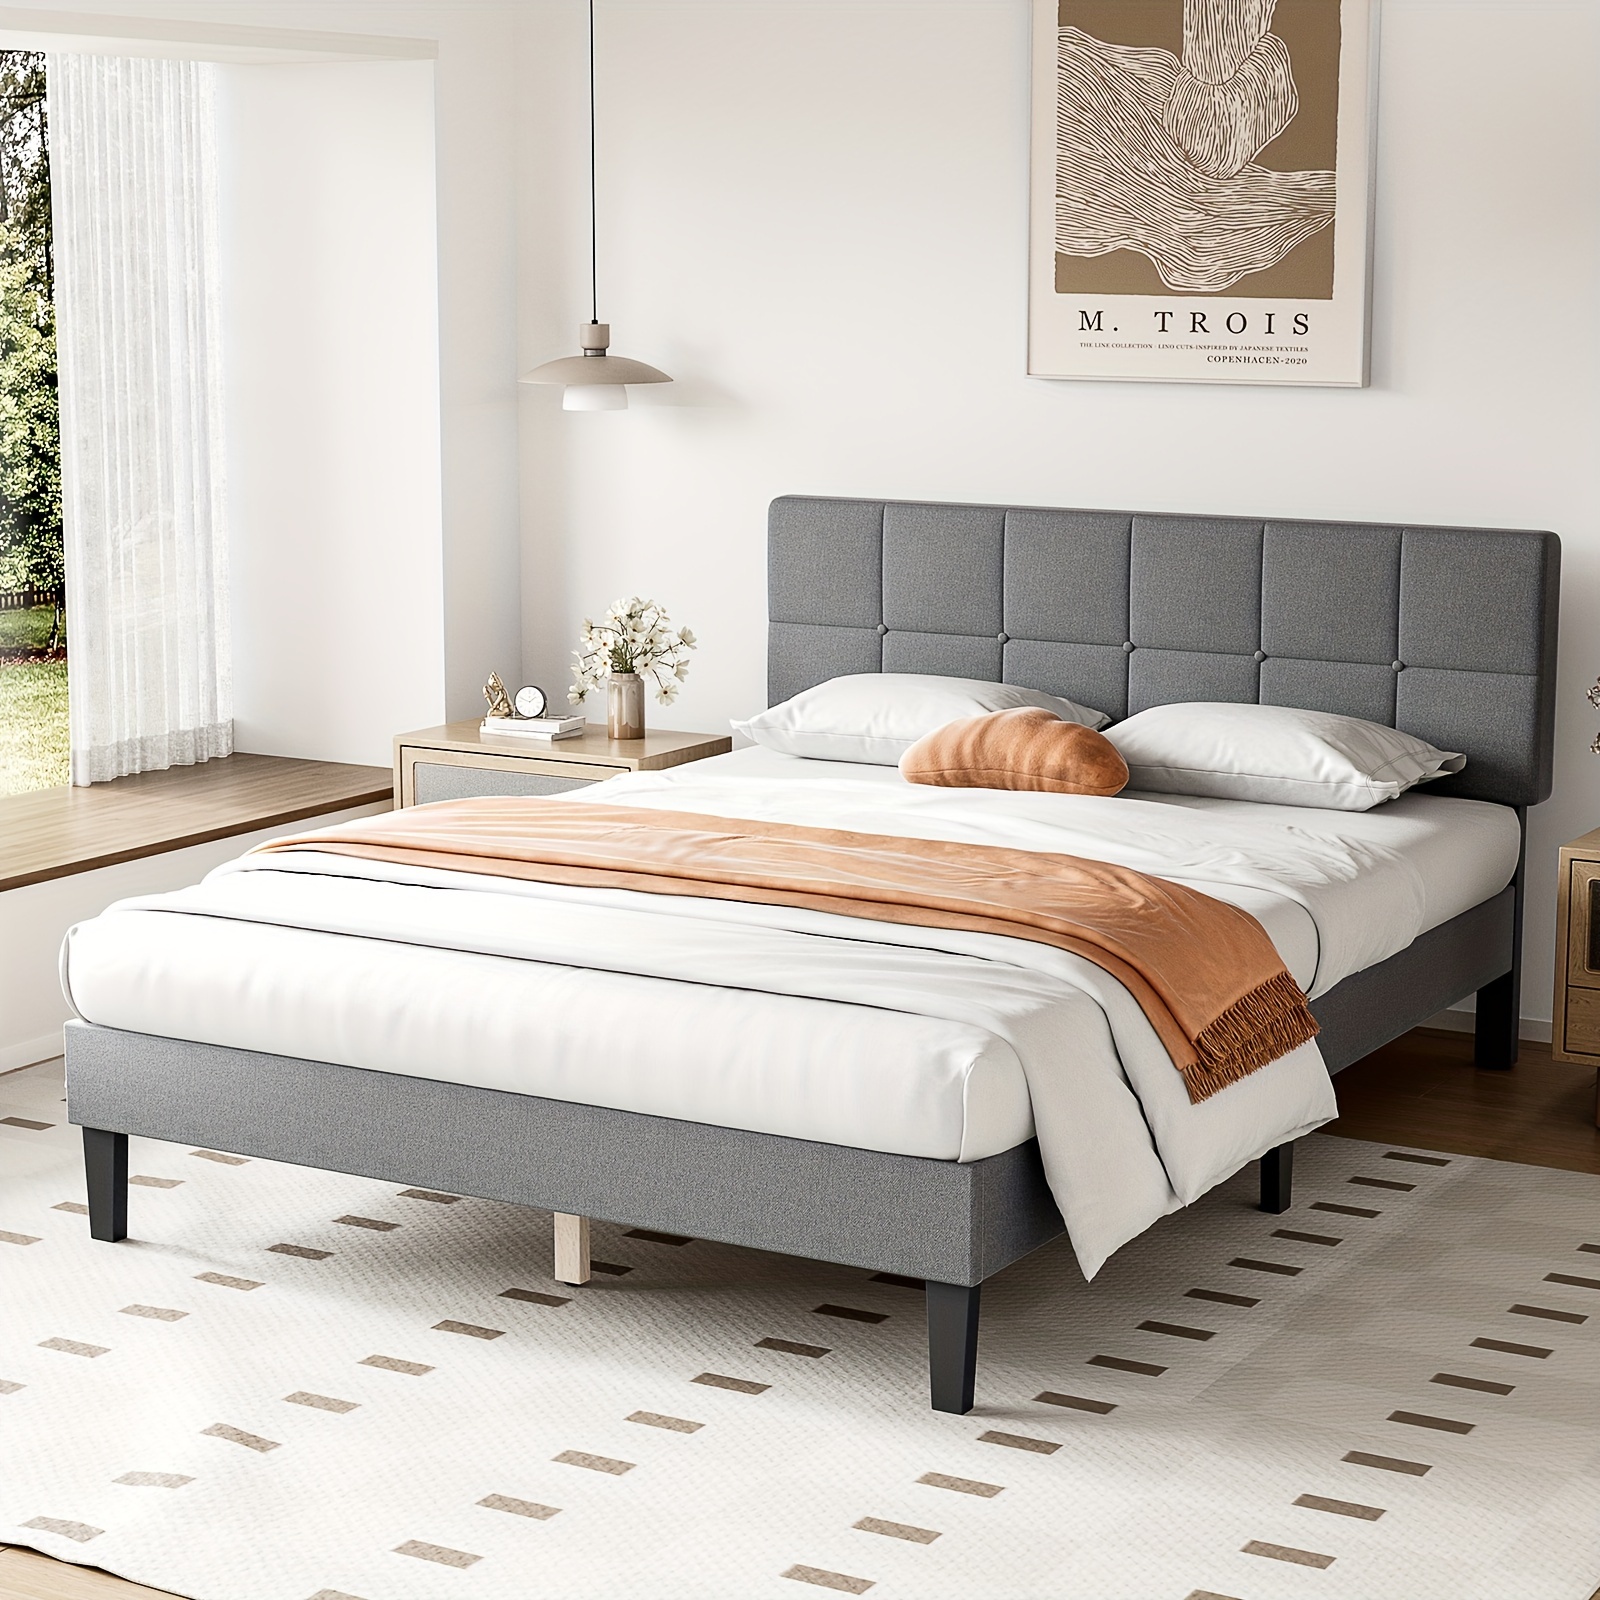 

Sumg Queen Bed Frame With Headboard, No Box Spring Needed, Linen Upholstered Platform Bed Frame With Wood Slats Support, Noise Free, Perfect For A 's Sleep Grey